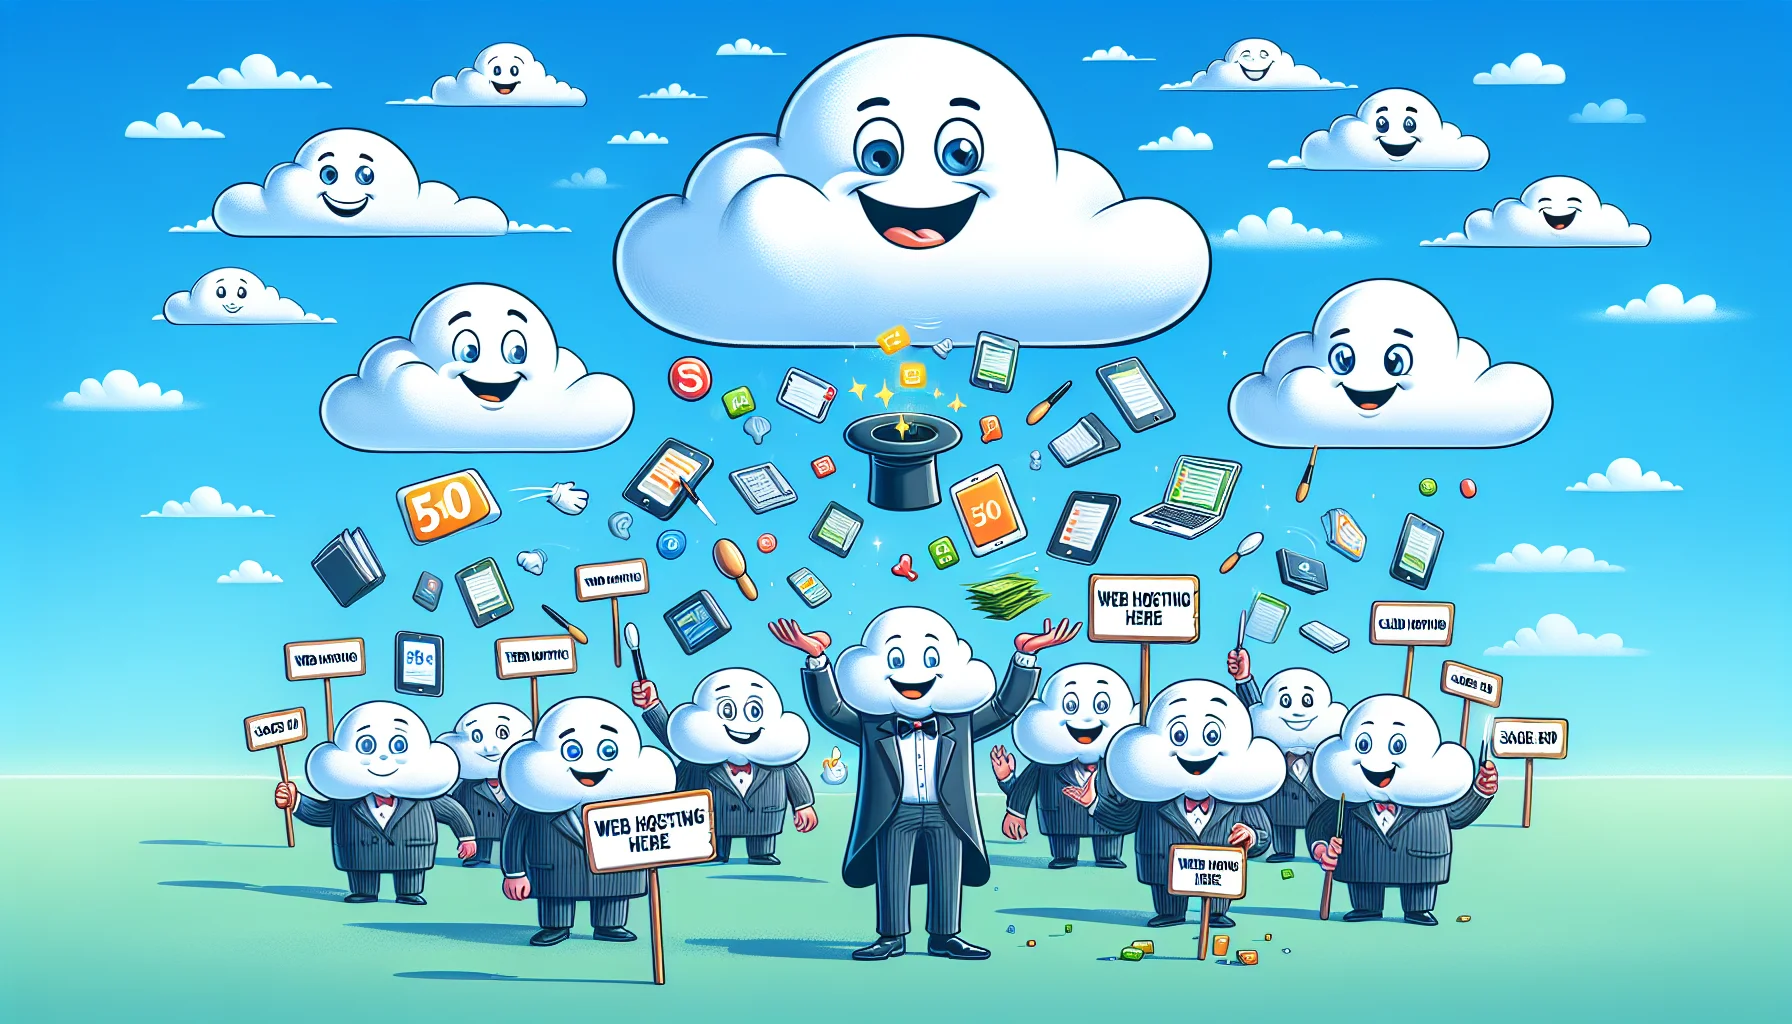 Imagine a humorous scenario of sage 50 cloud hosting. Visualize a group of cartoon clouds, with various human-like expressions, juggling numerous digital icons representing data, files, and applications. Among them is the biggest cloud pretending to be a magician, pulling a '50 sign', symbolizing sage 50, out of a virtual hat. Below them, a line of other cheerful clouds are forming a parade. They all have signs that read 'Web Hosting Here' in bold, appealing fonts. The background is a beautiful, clear blue sky. The scene should feel light, amusing, and stress-free, highlighting the ease and simplicity of sage 50 cloud hosting.